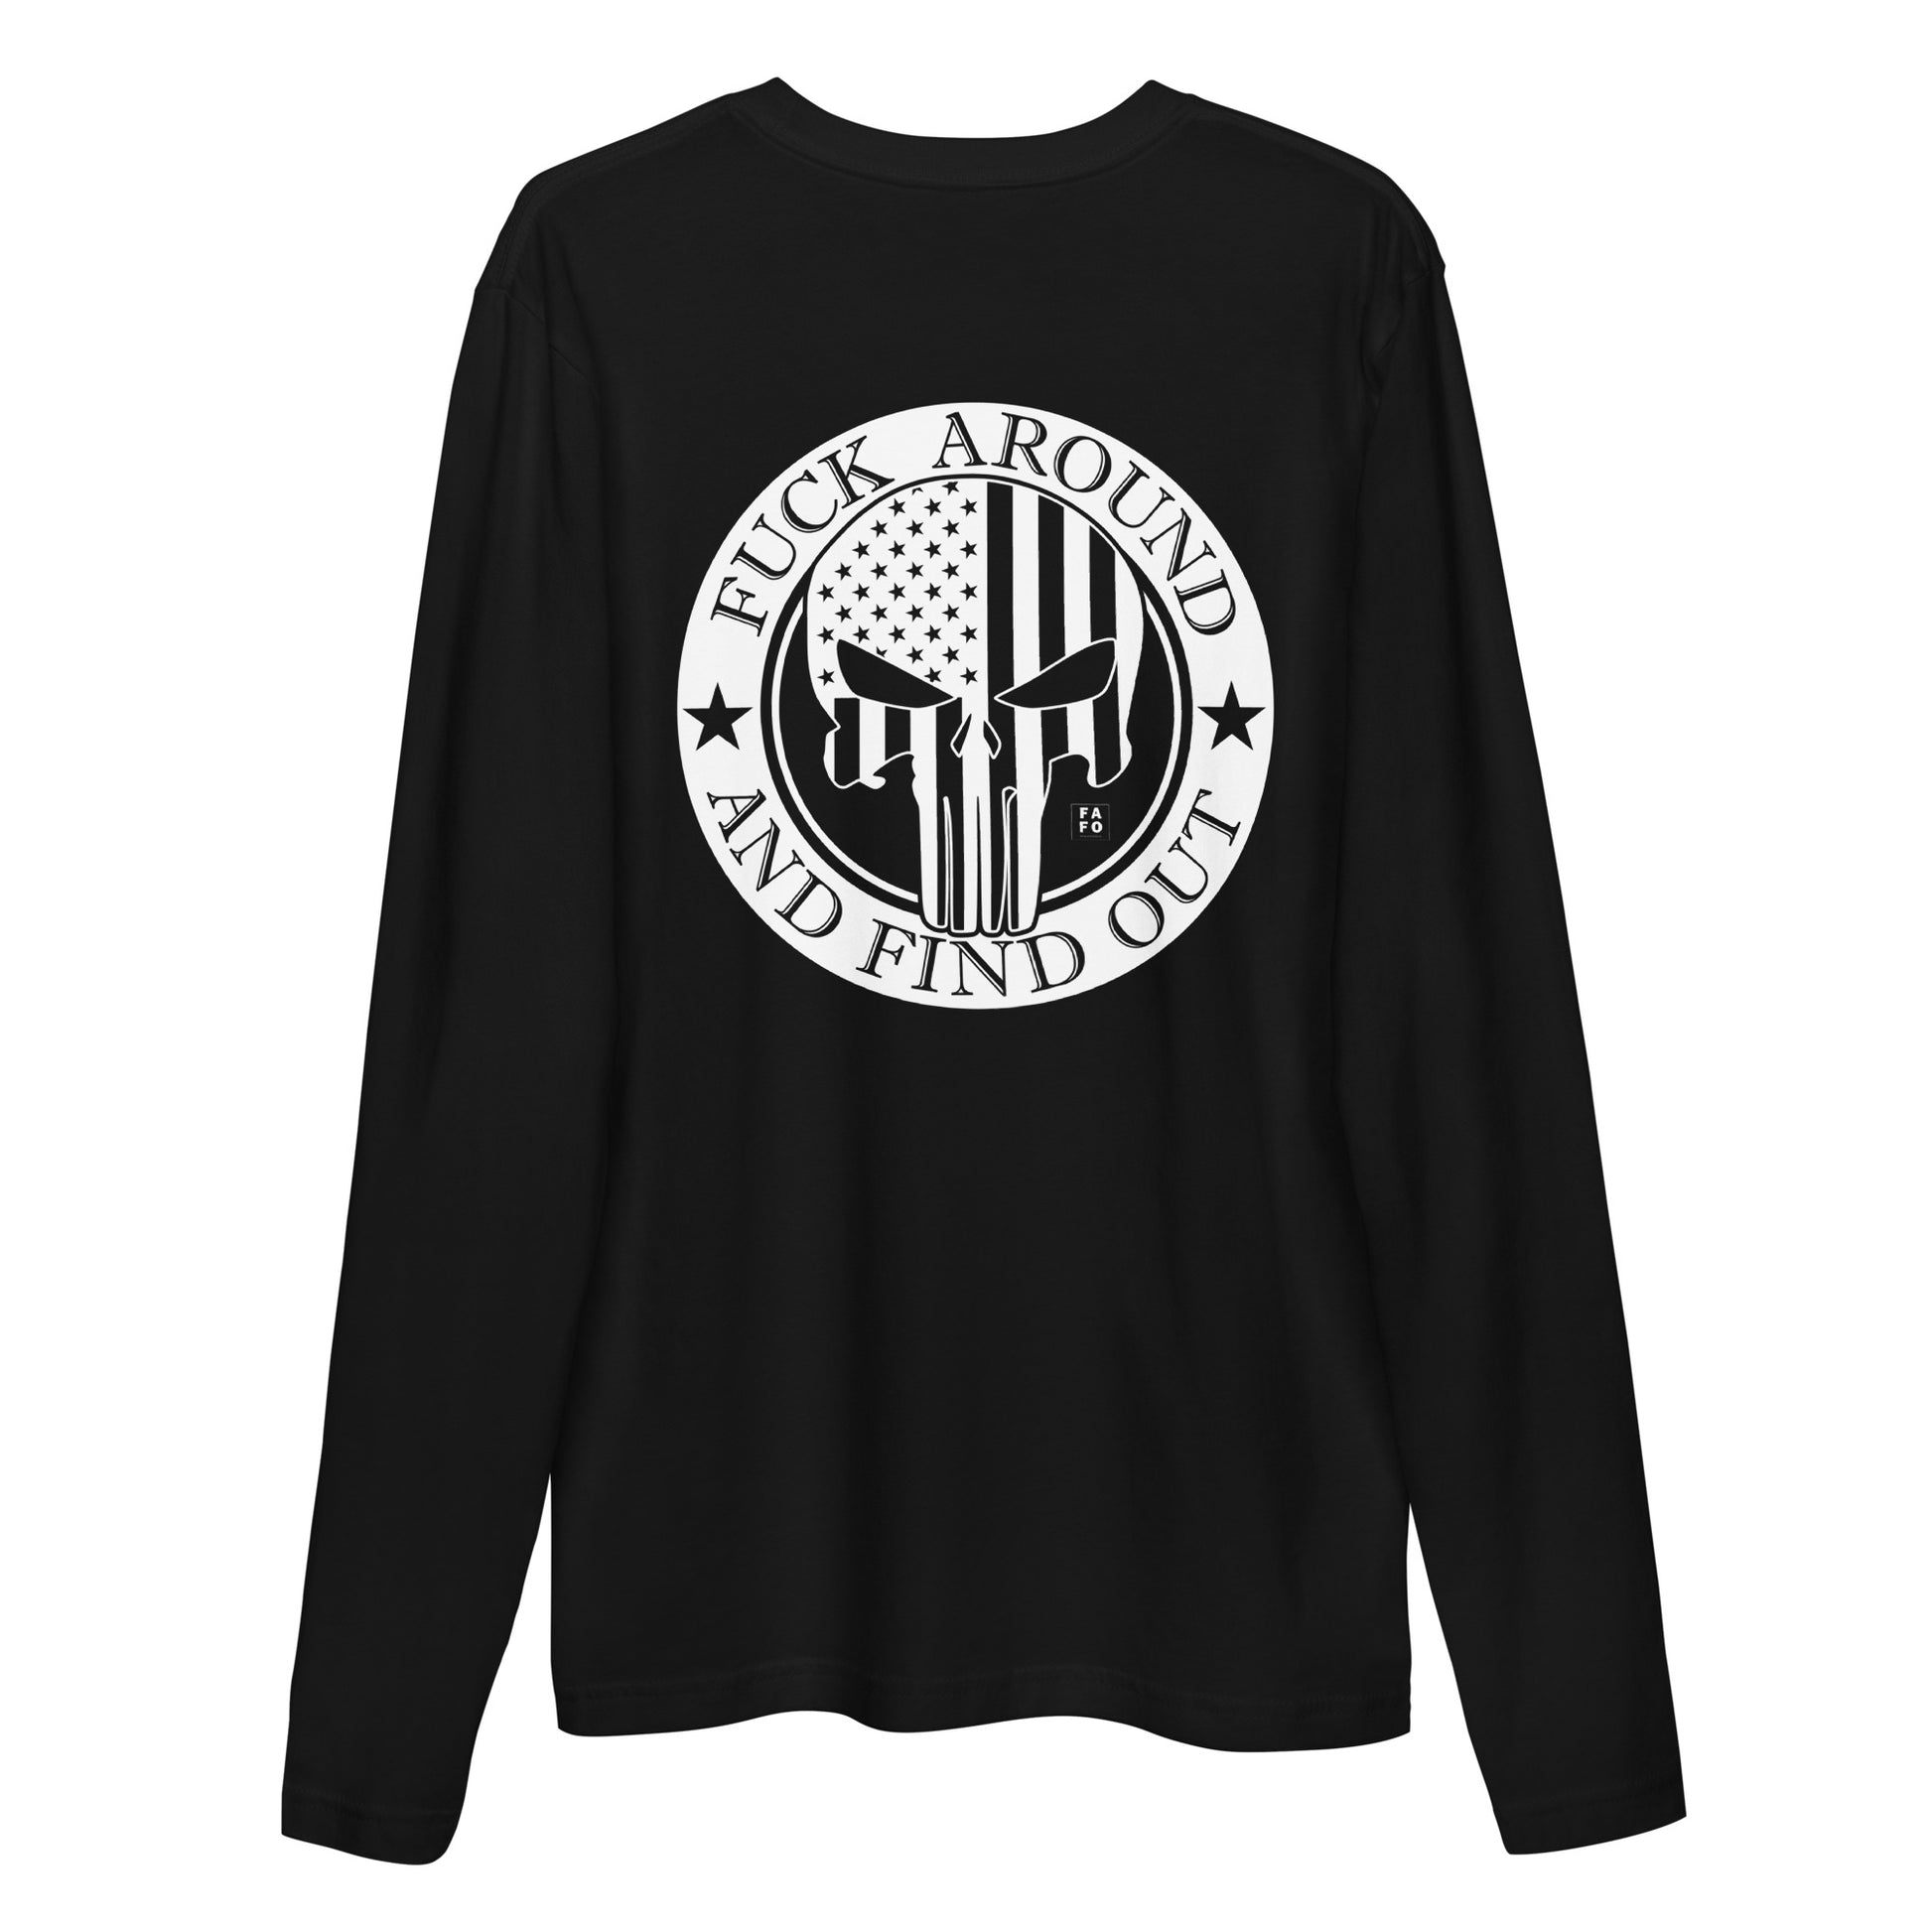 Men's Long Sleeve Crew Shirt - FAFO F*k Around & Find Out - FAFO Sportswear